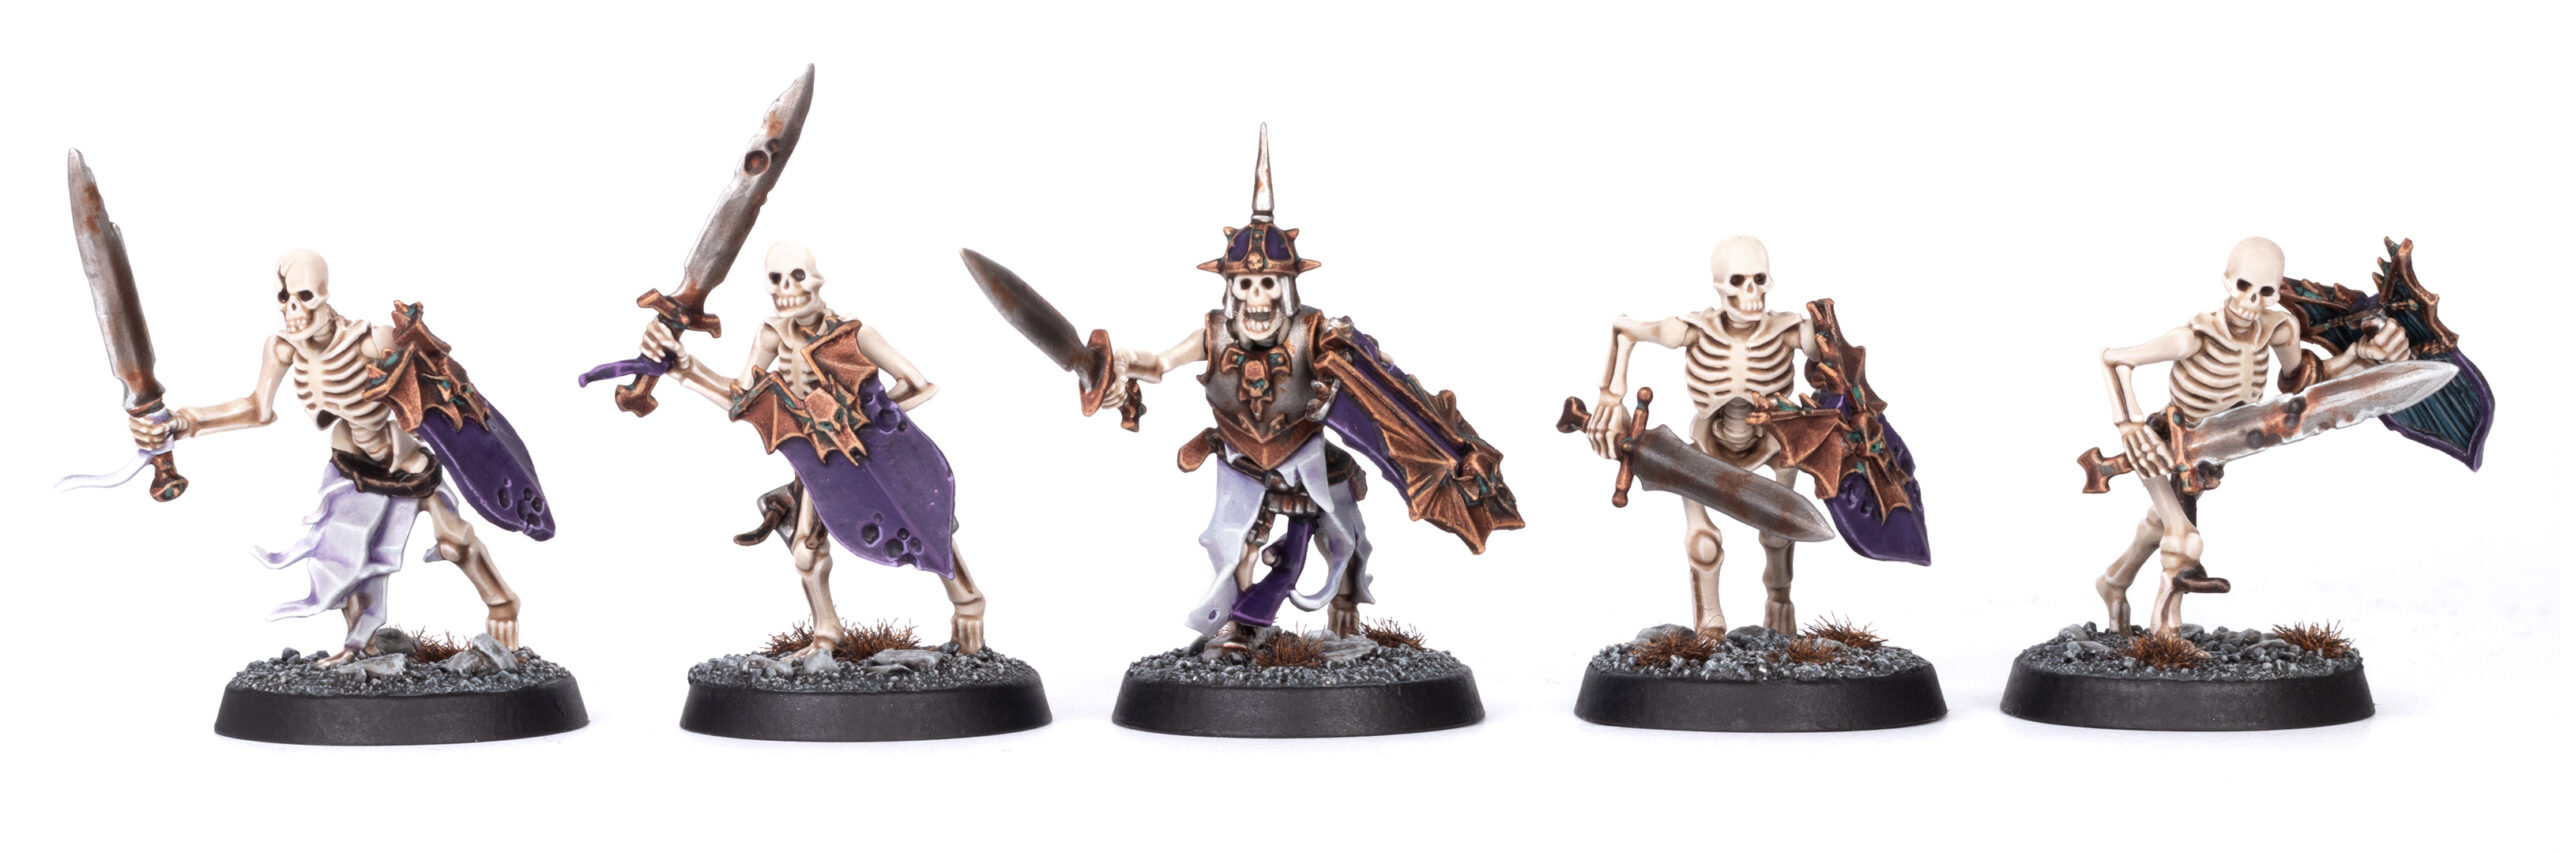 5 classic Vampire Counts Skeleton Warriors painted by Stahly